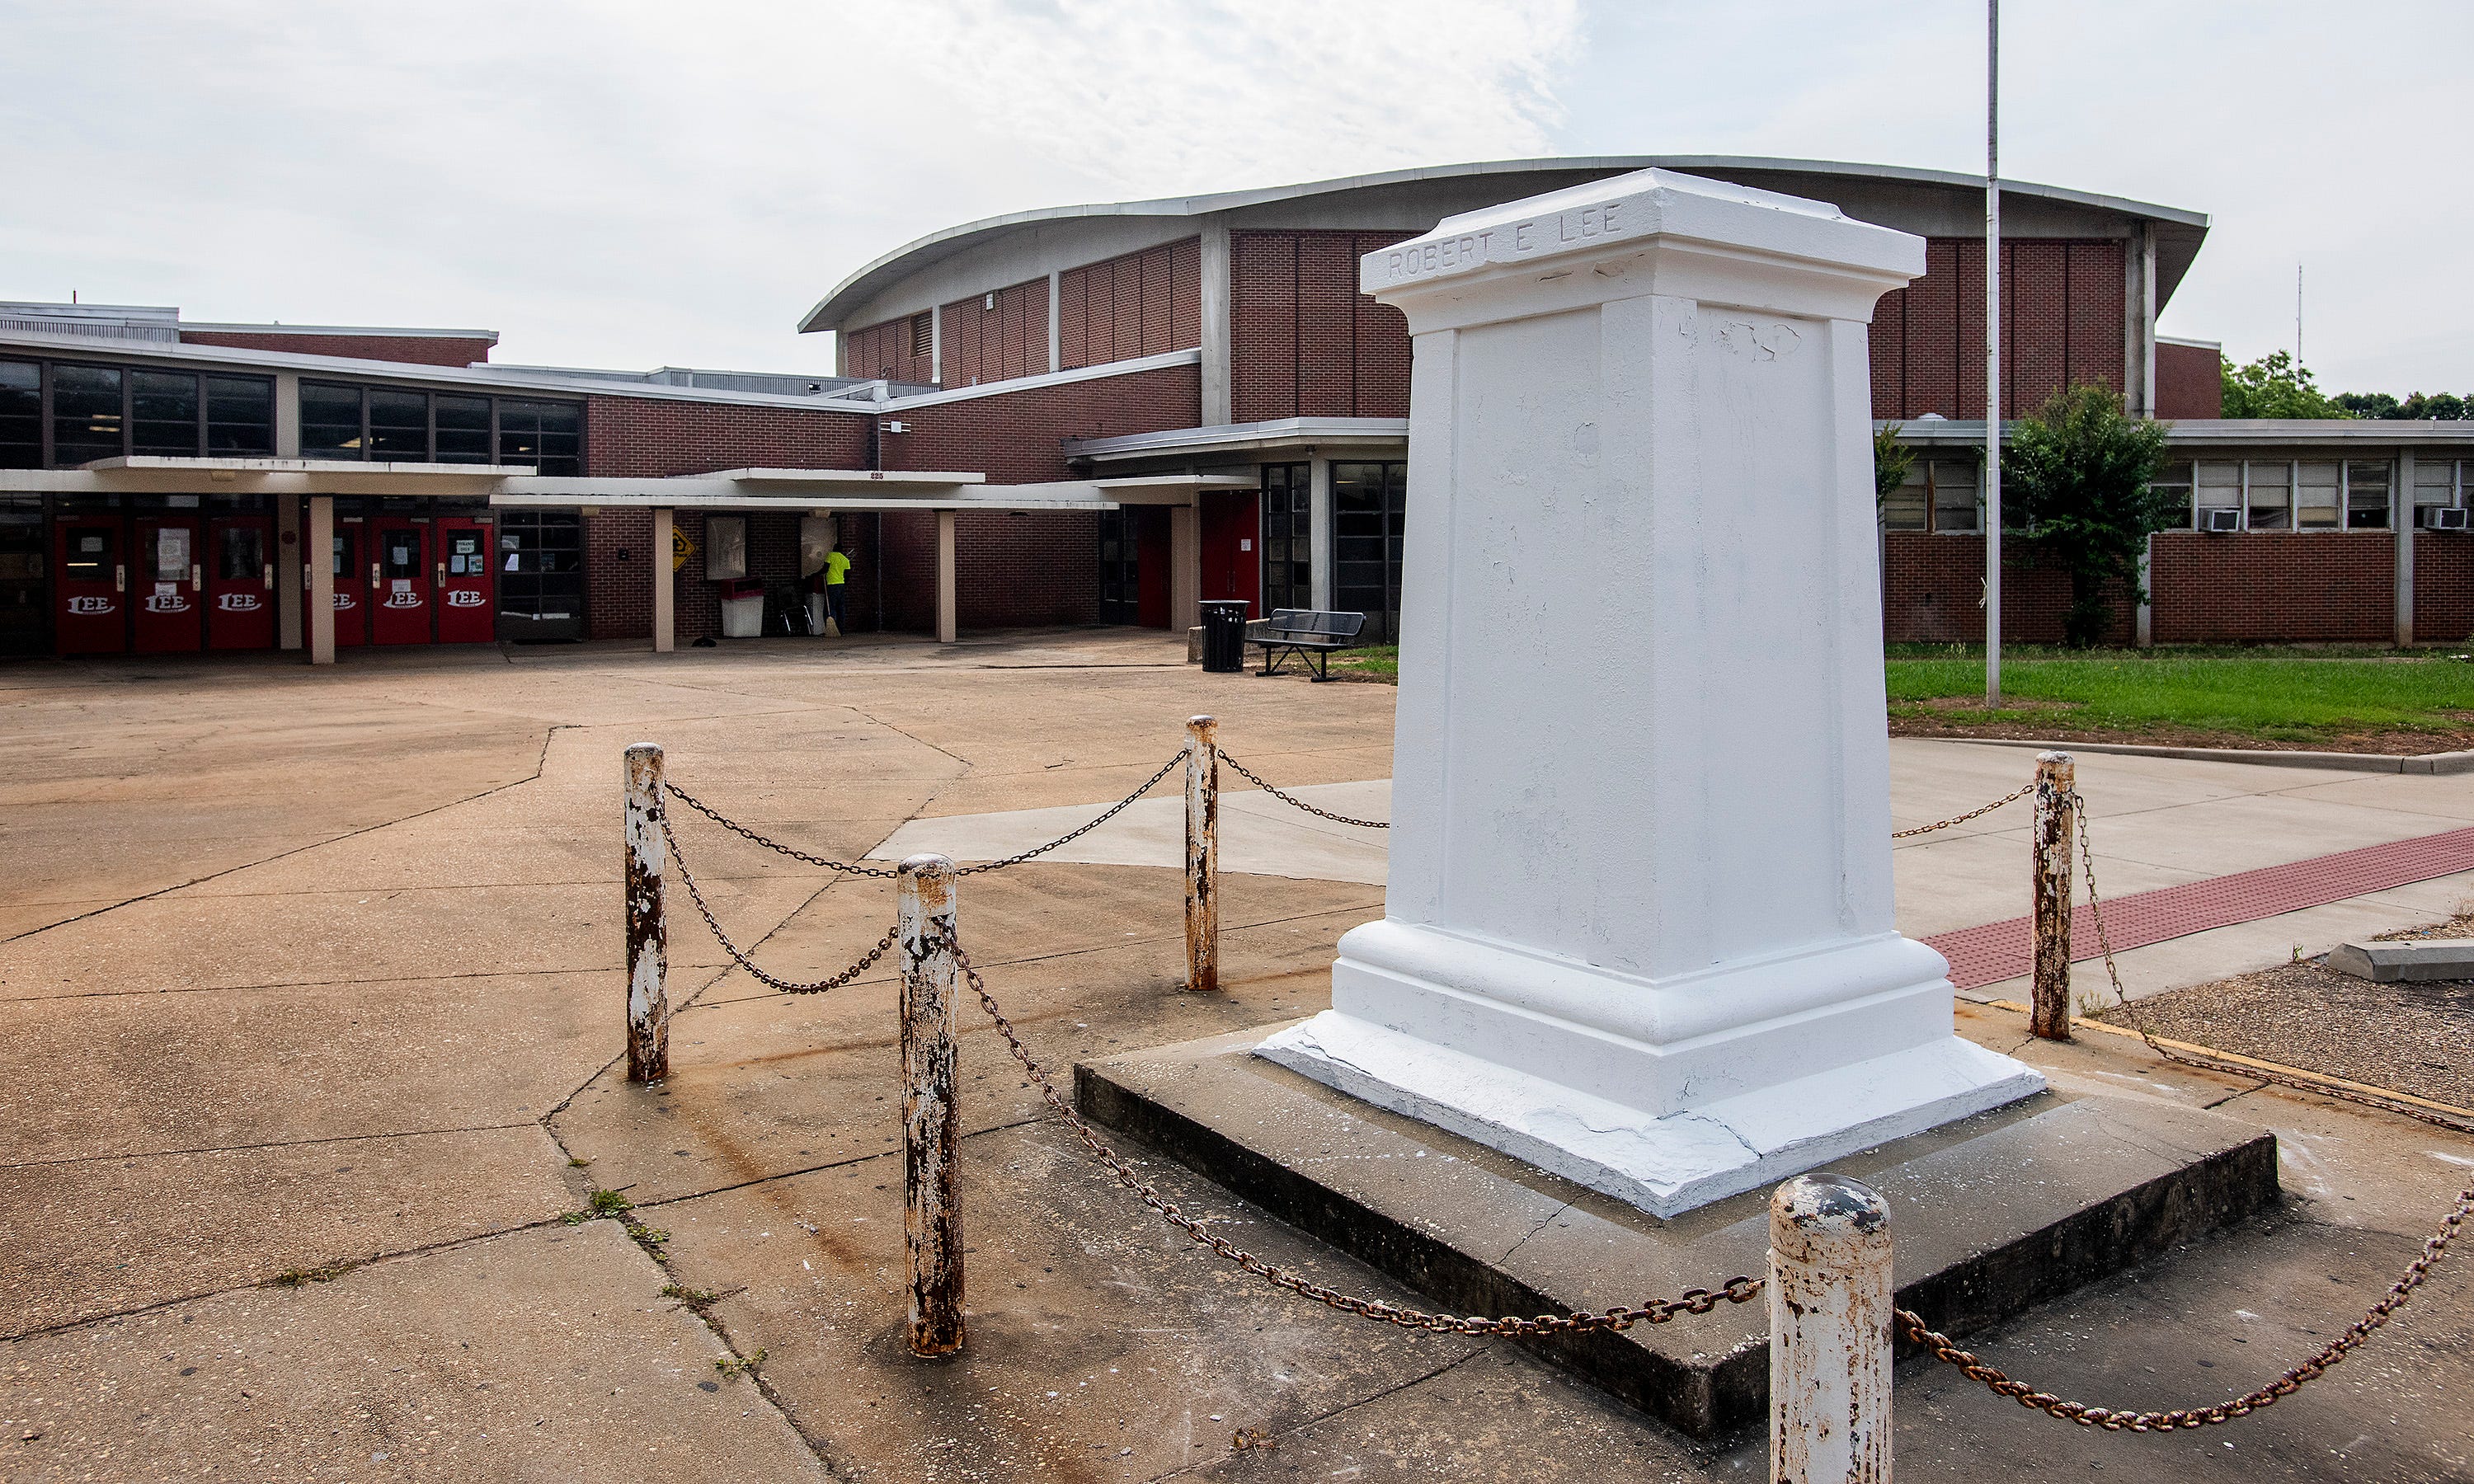 Lee High School plaque warns students never discredit the name of this  'great man'